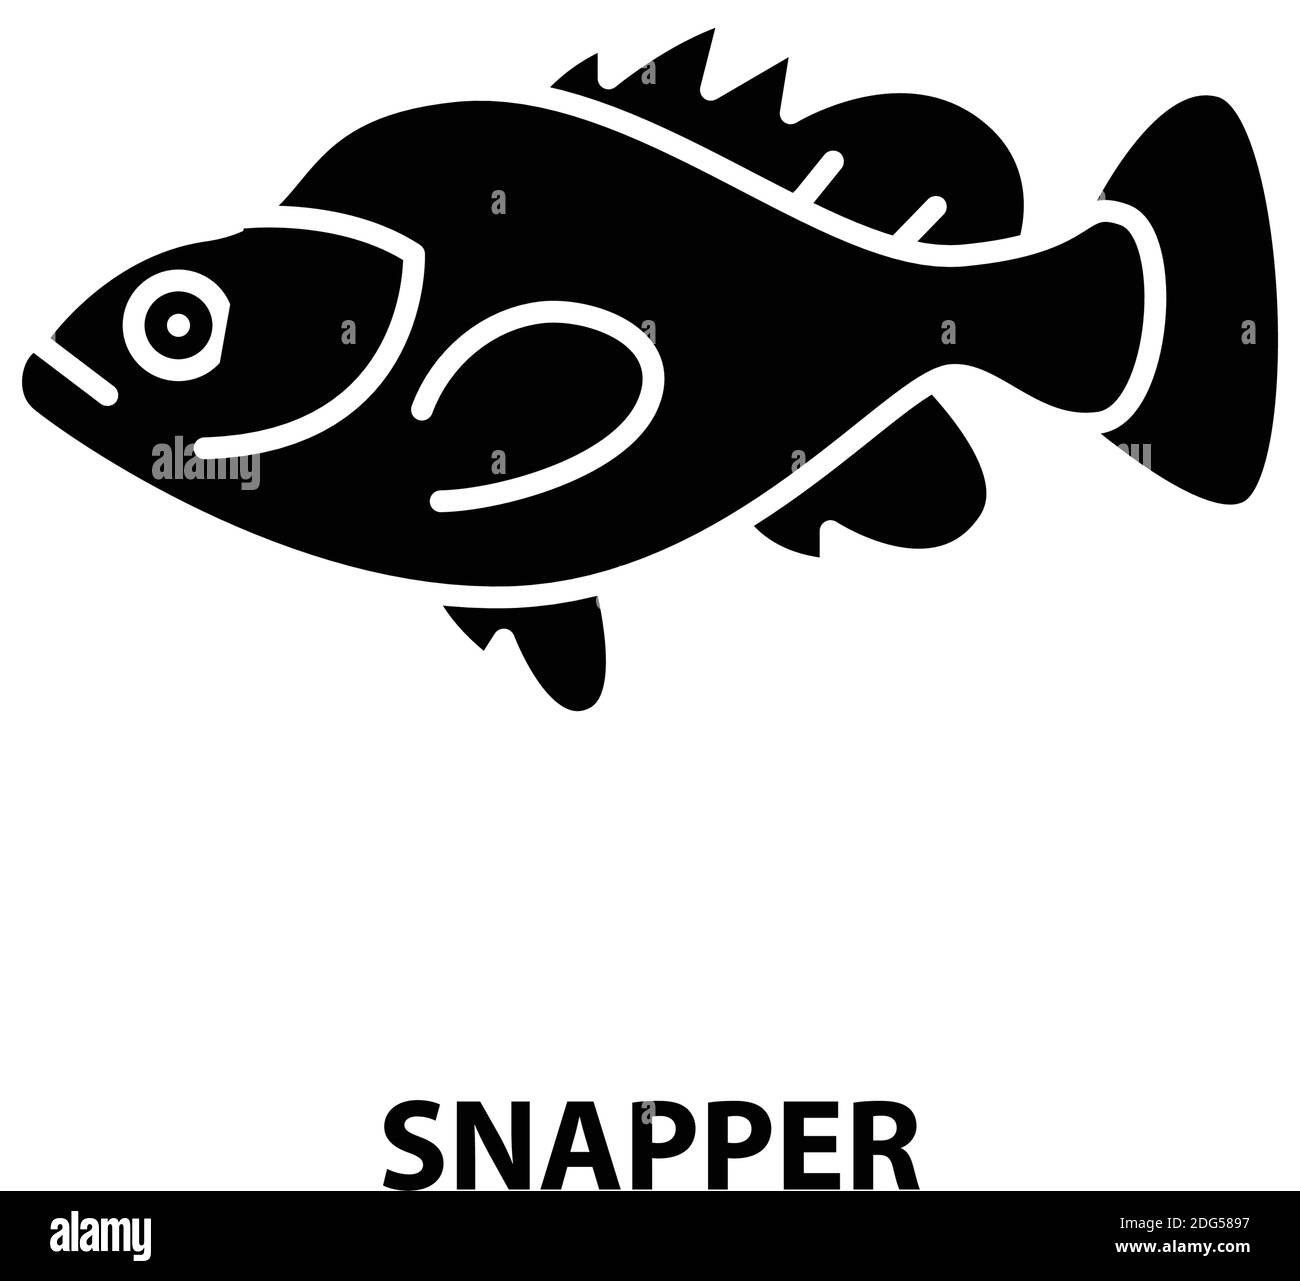 snapper icon, black vector sign with editable strokes, concept illustration Stock Vector